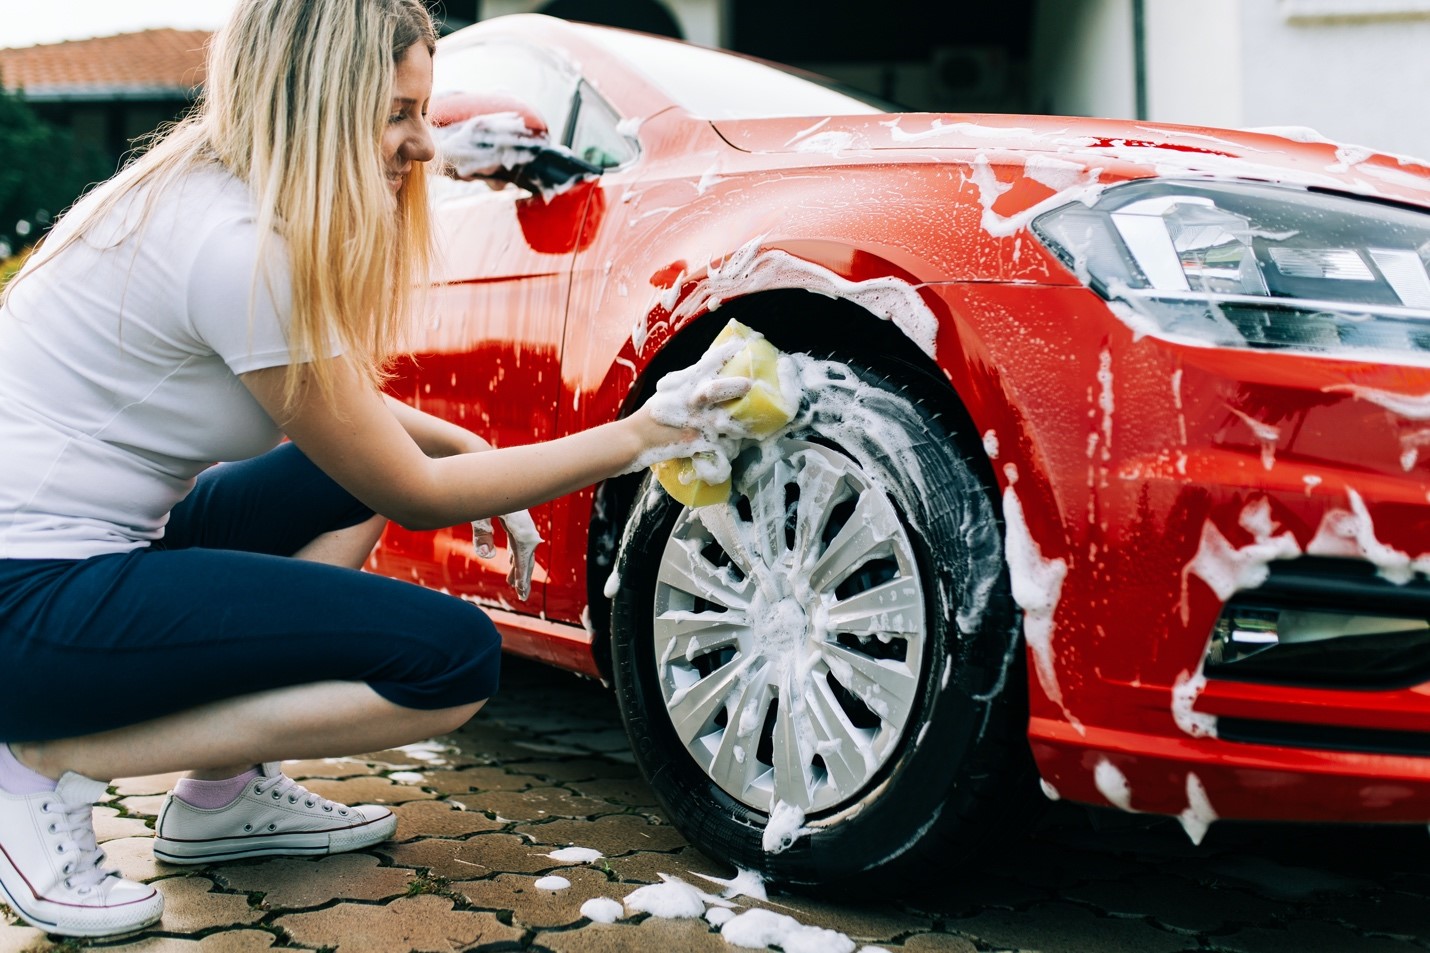 All about tools and technology - Professional Carwashing & Detailing